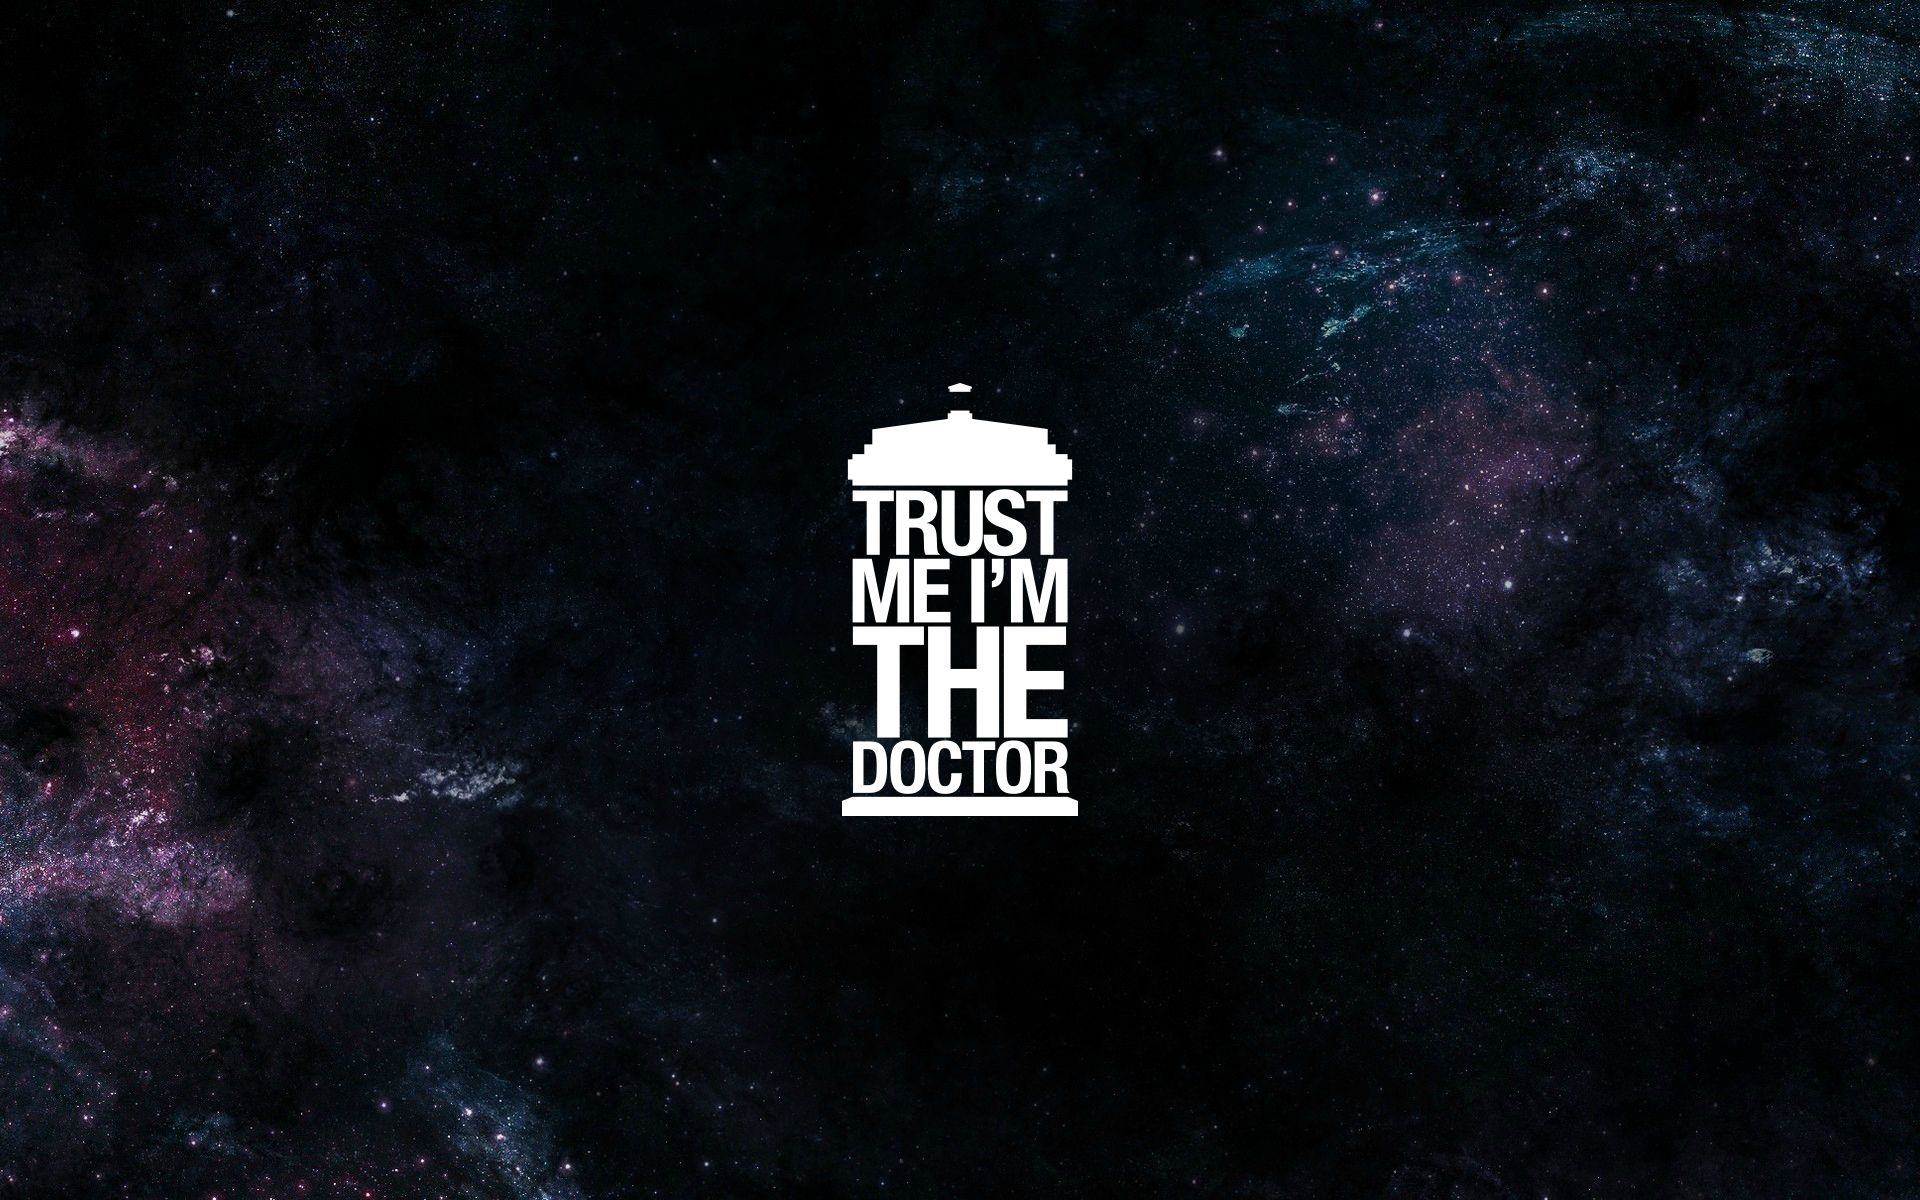 Doctor Who Ipad Wallpapers